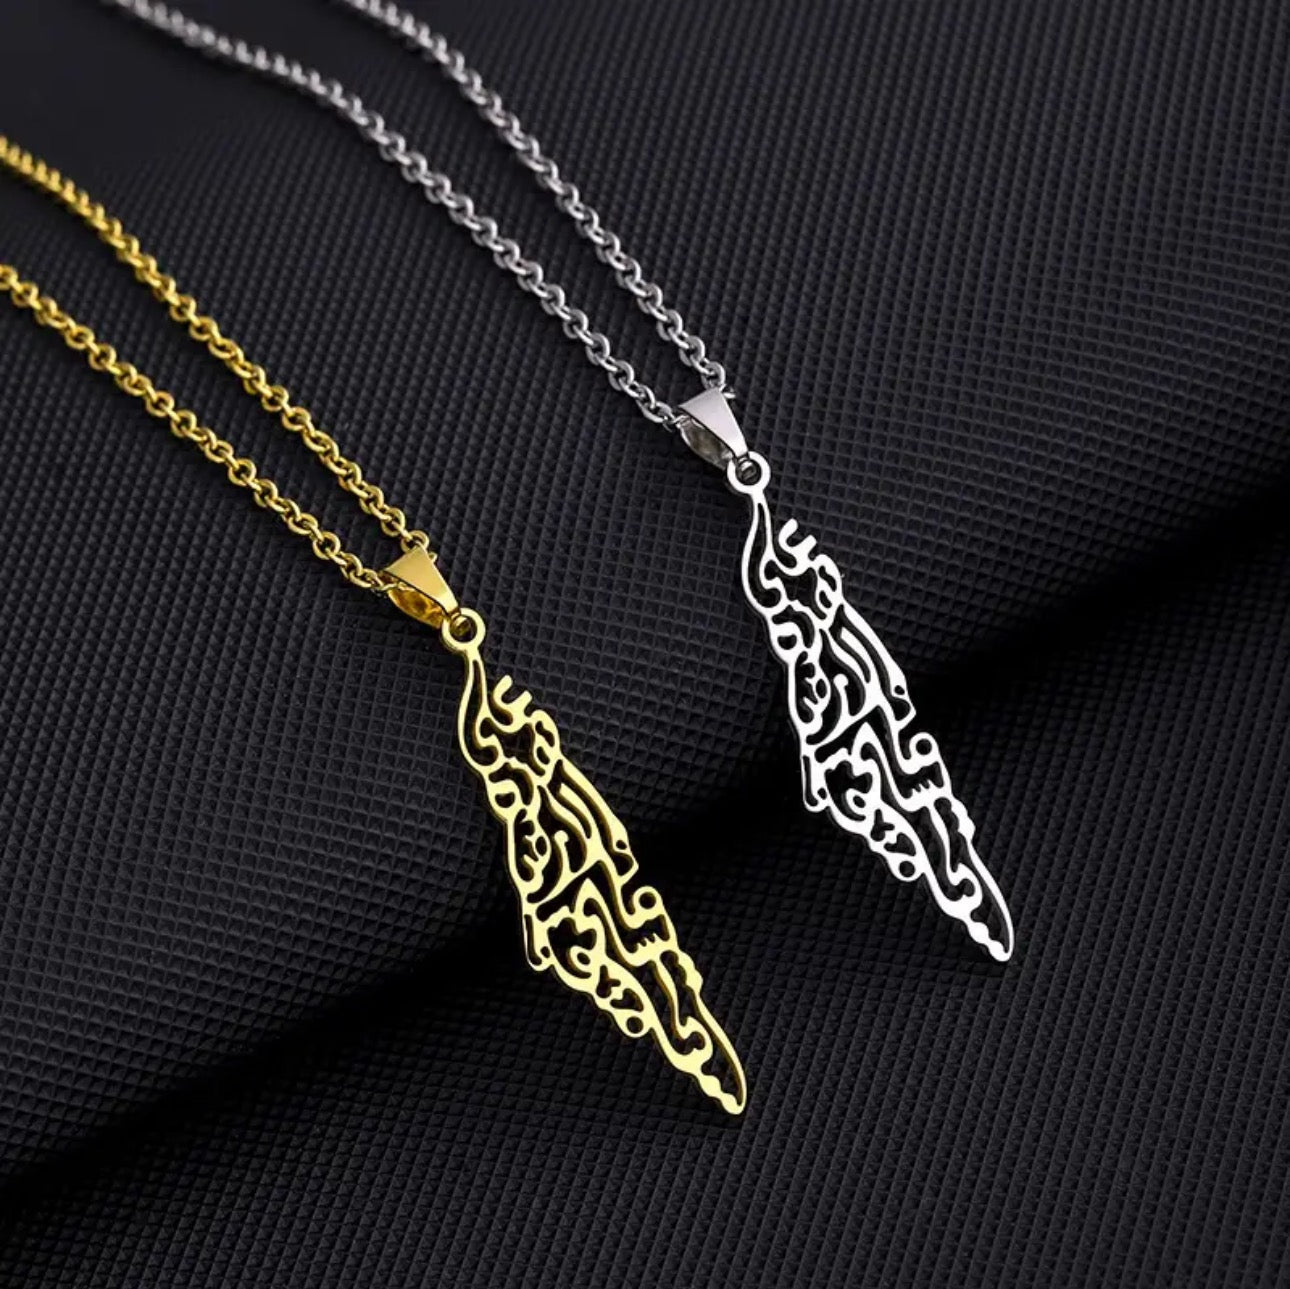 Palestine Arabic Caligraphy Necklace